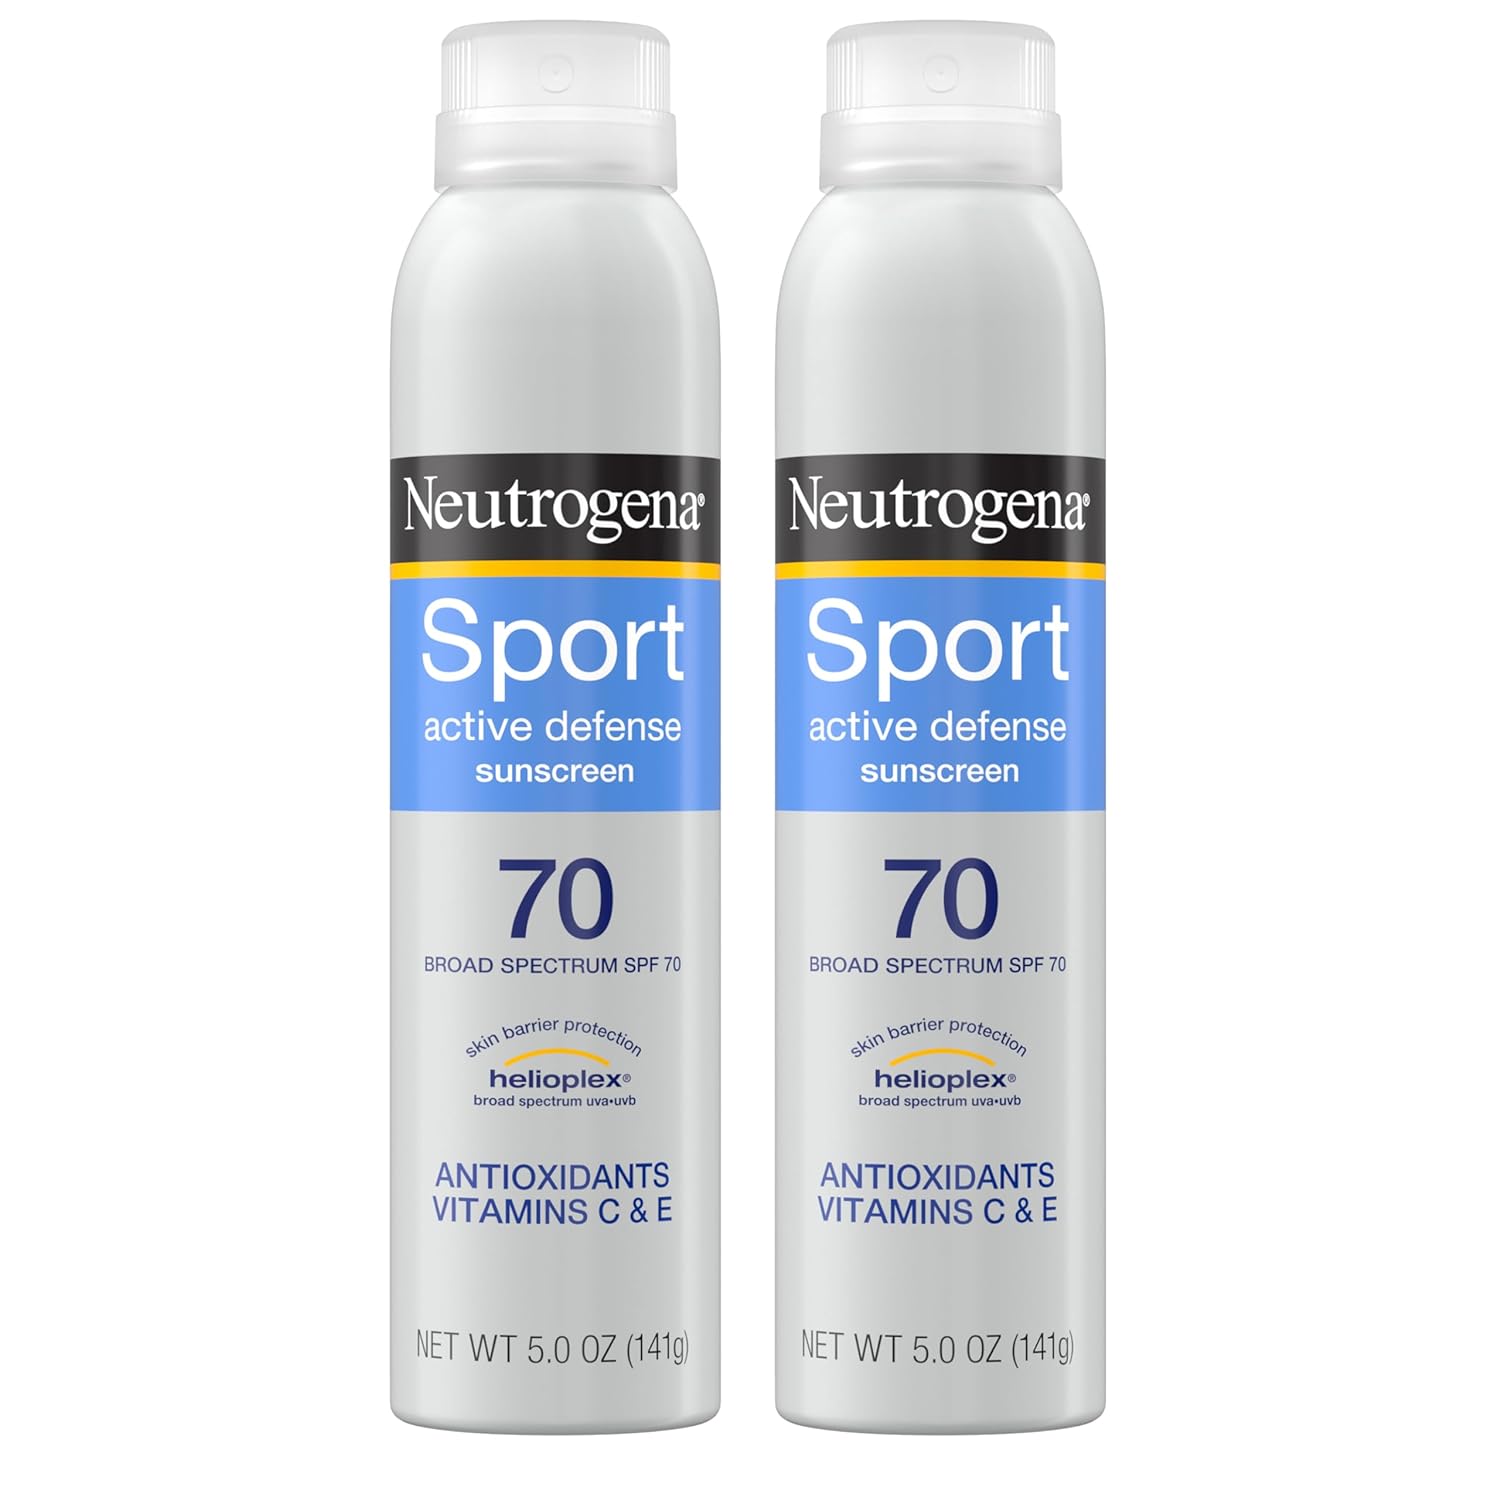 Neutrogena Sport Active Defense SPF 70 Sunscreen Spray, Sweat & Water Resistant Spray Sunscreen with Broad Spectrum Protection for Sunburn Prevention, Oxybenzone-Free, Twin Pack, 2 x 5 oz